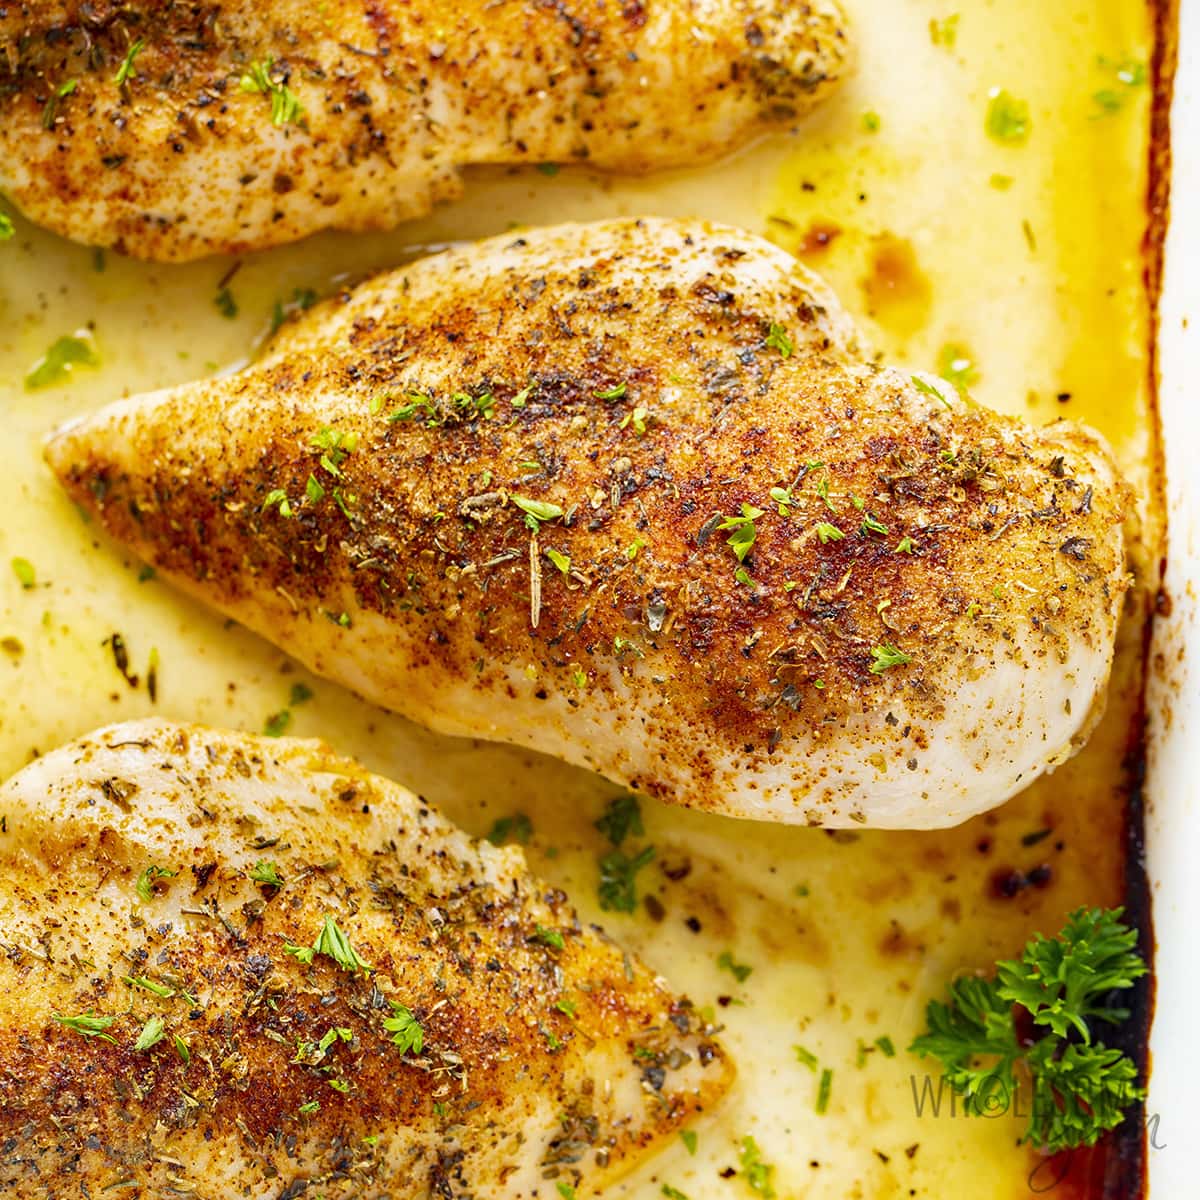 Oven baked chicken breast in a baking dish.